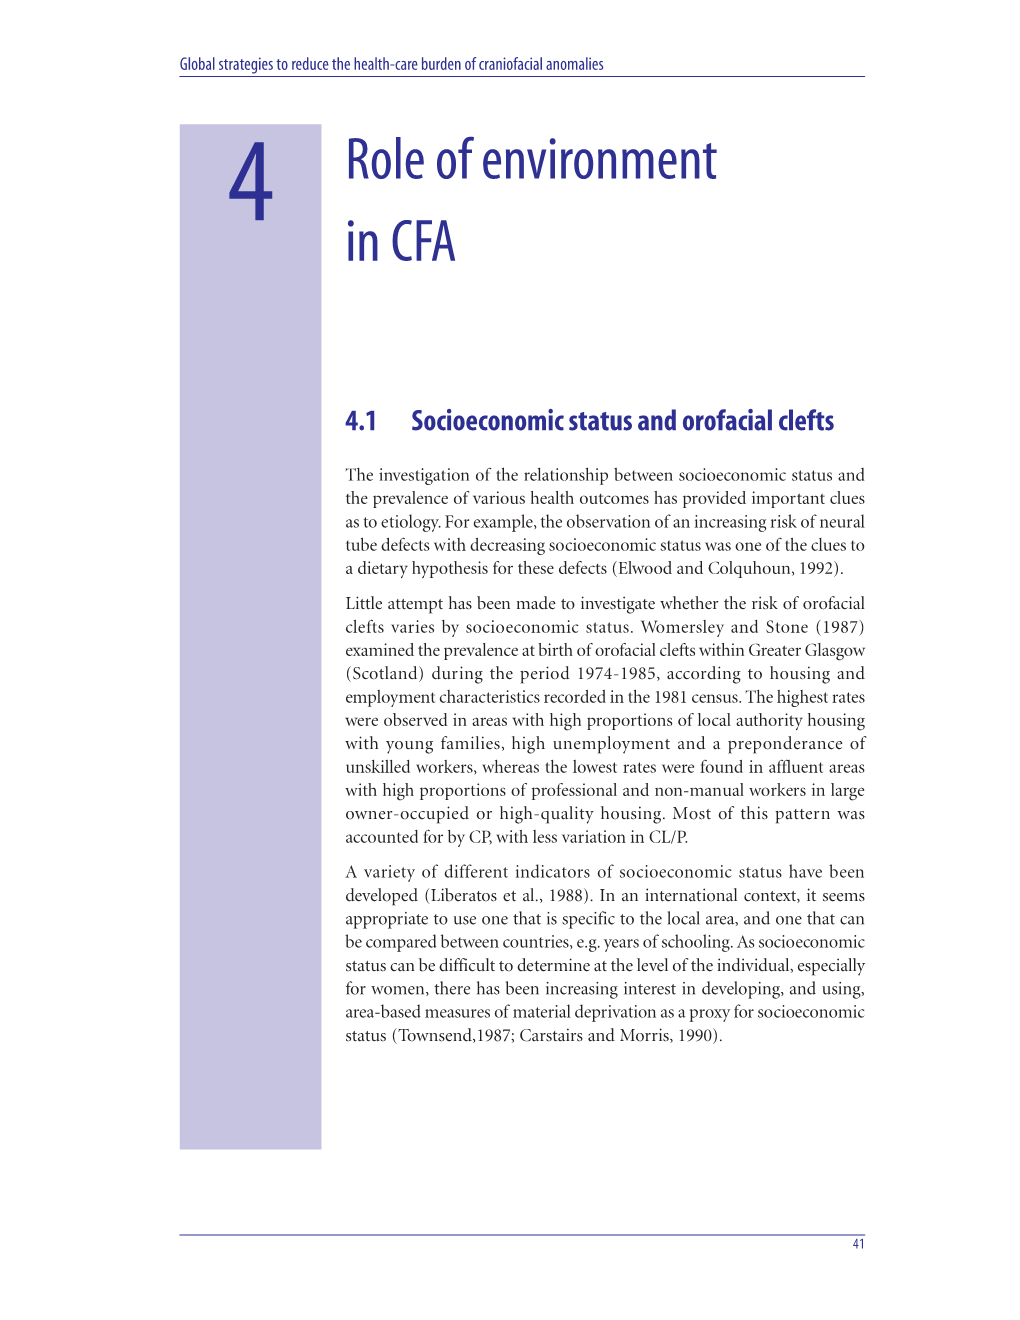 Role of Environment In